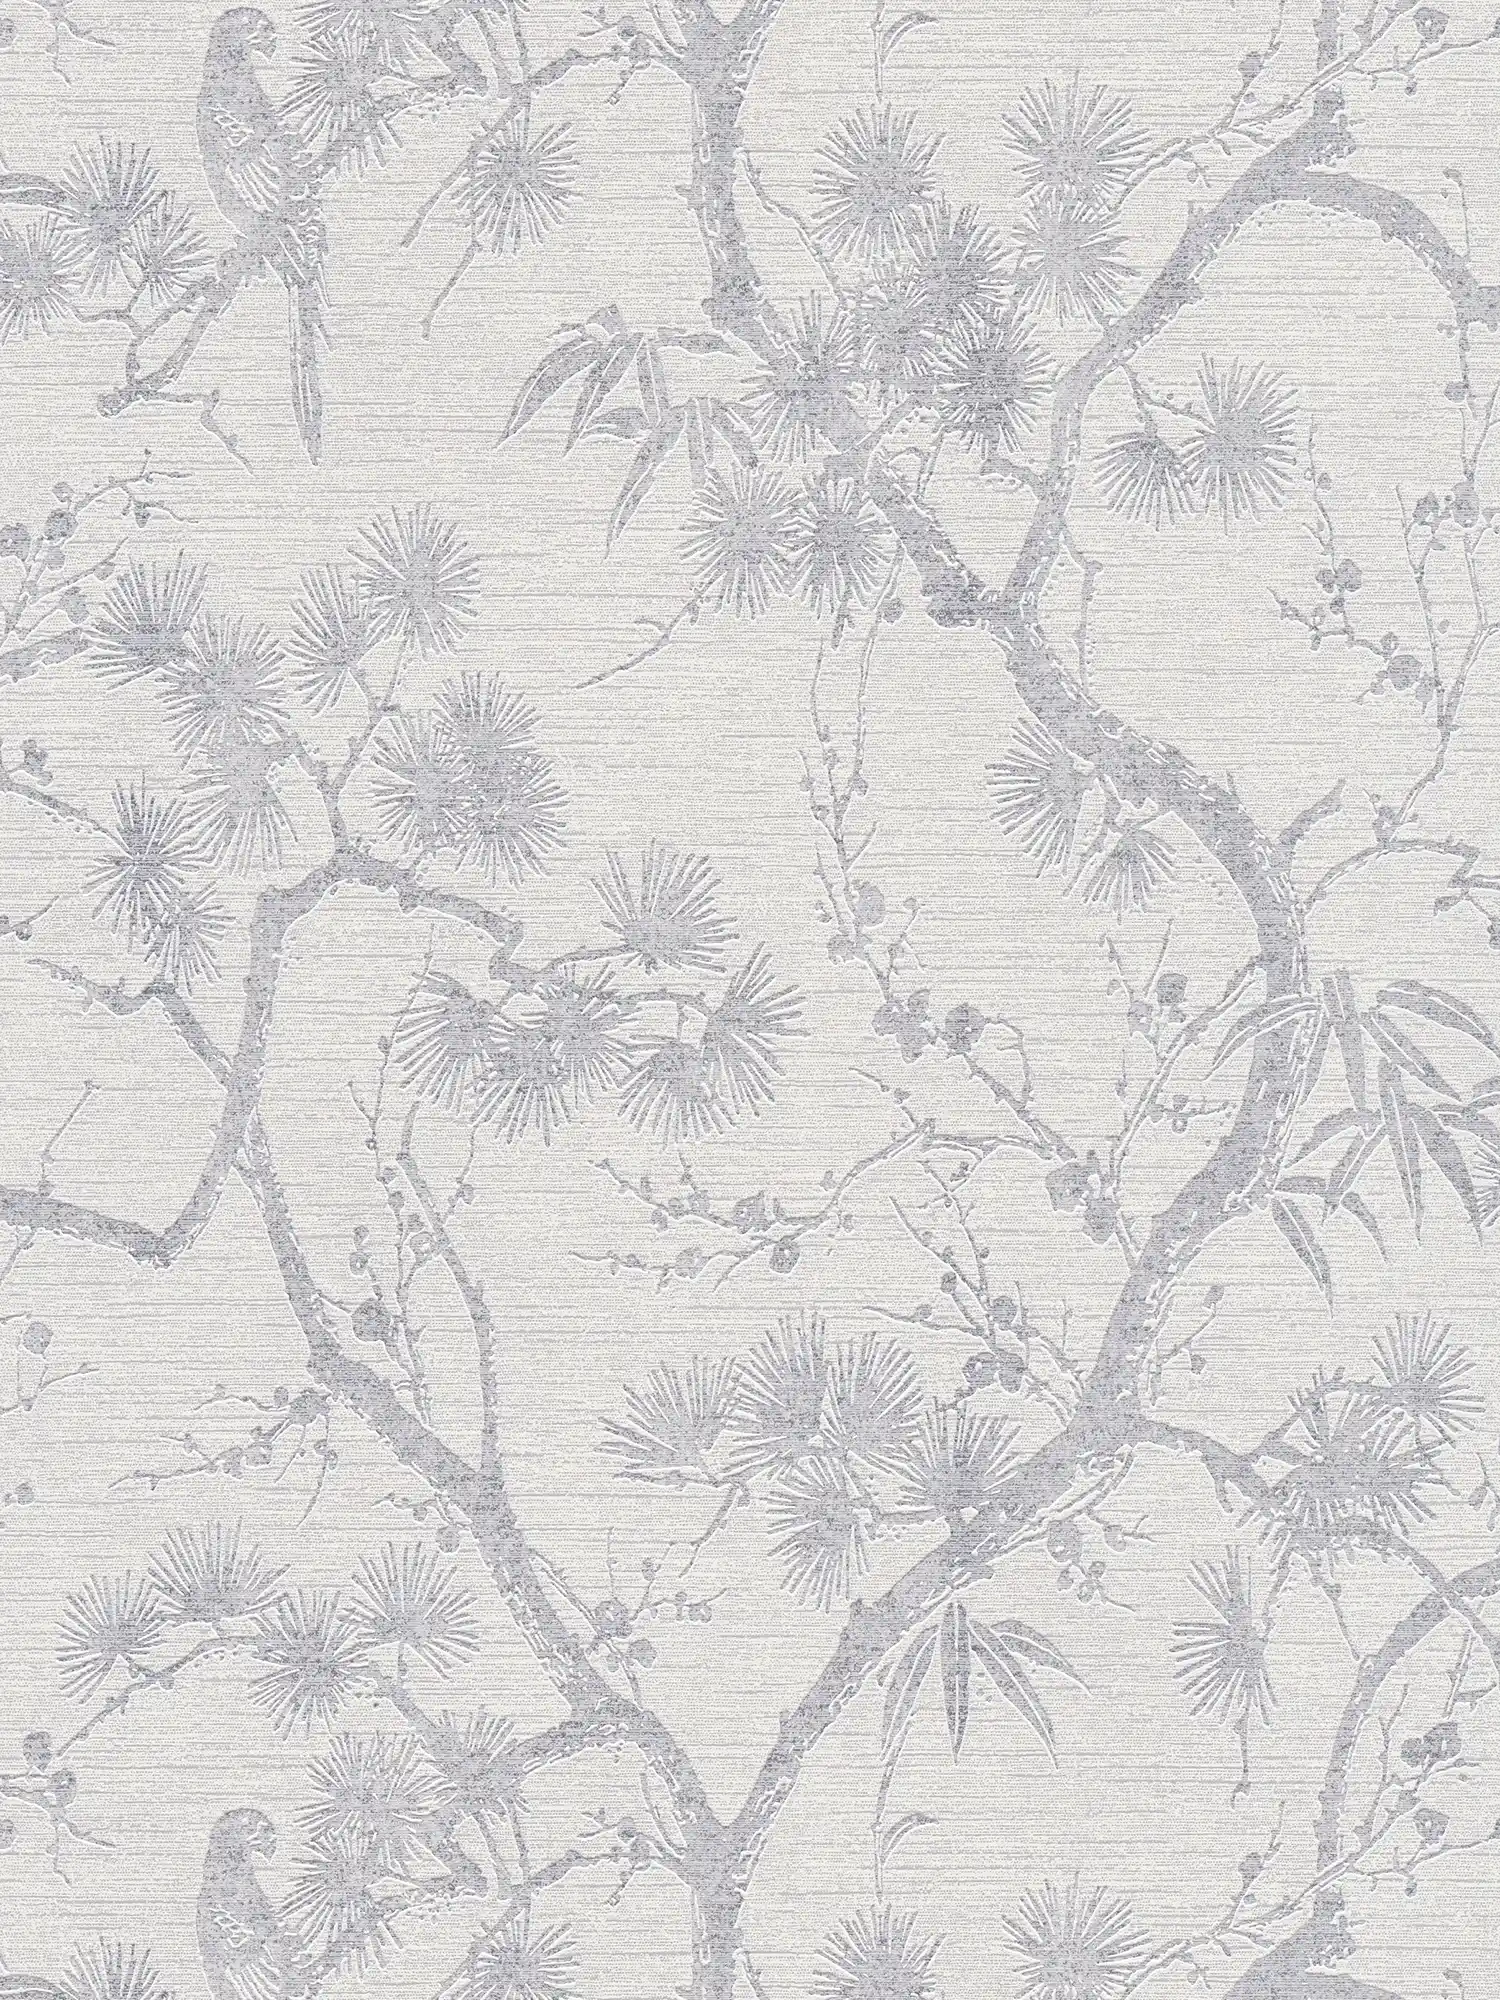 Wallpaper with natural design in Asia style - grey, metallic, white
